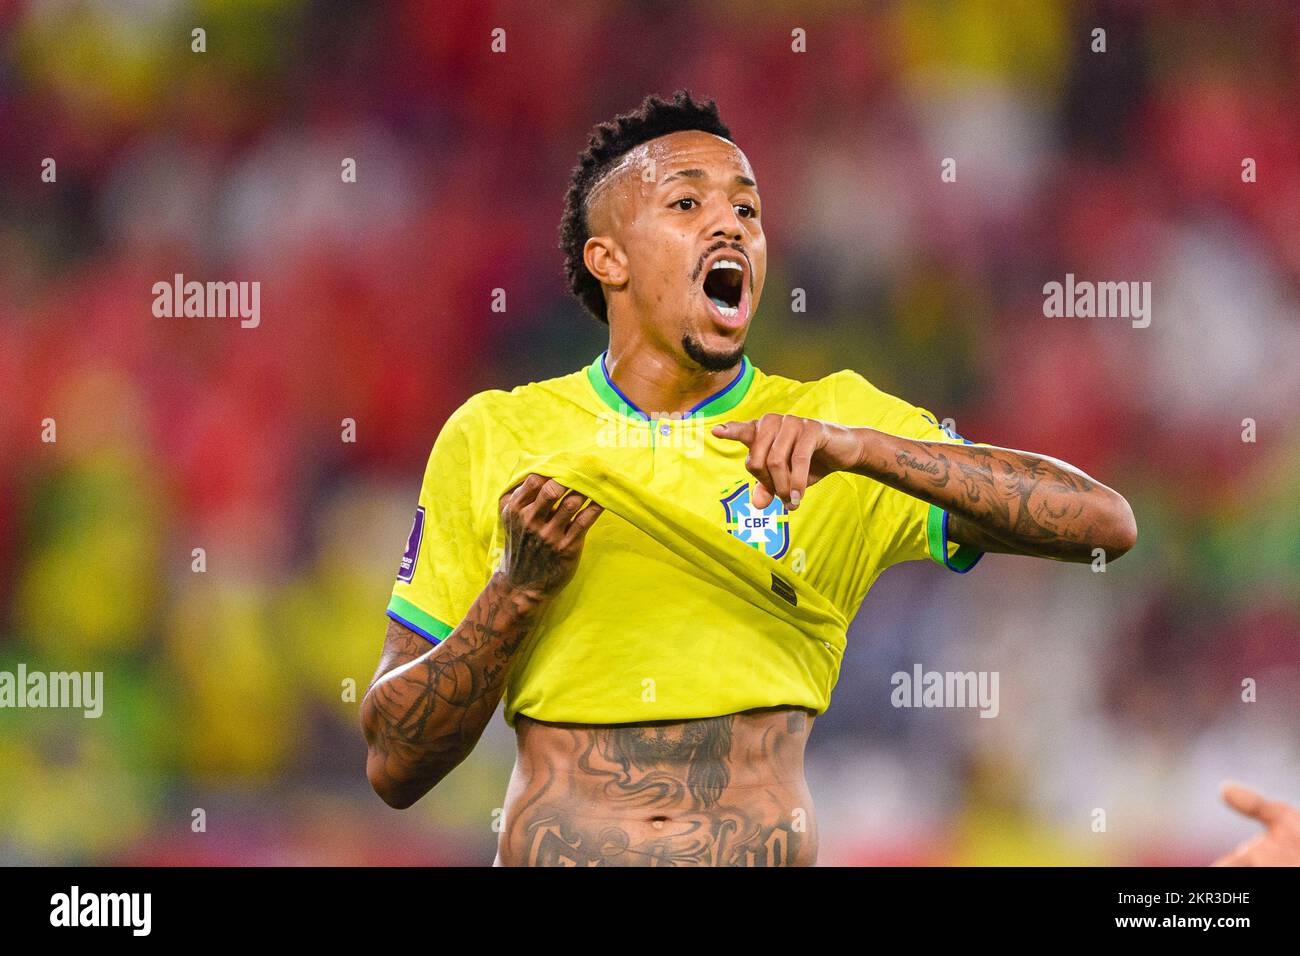 Doha, Qatar. 28th Nov, 2022. Estadio 974 Eder Militao do Brasil during a match between Brazil and Switzerland, valid for the group stage of the World Cup, held at Estadio 974 in Doha, Qatar. (Marcio Machado/SPP) Credit: SPP Sport Press Photo. /Alamy Live News Stock Photo